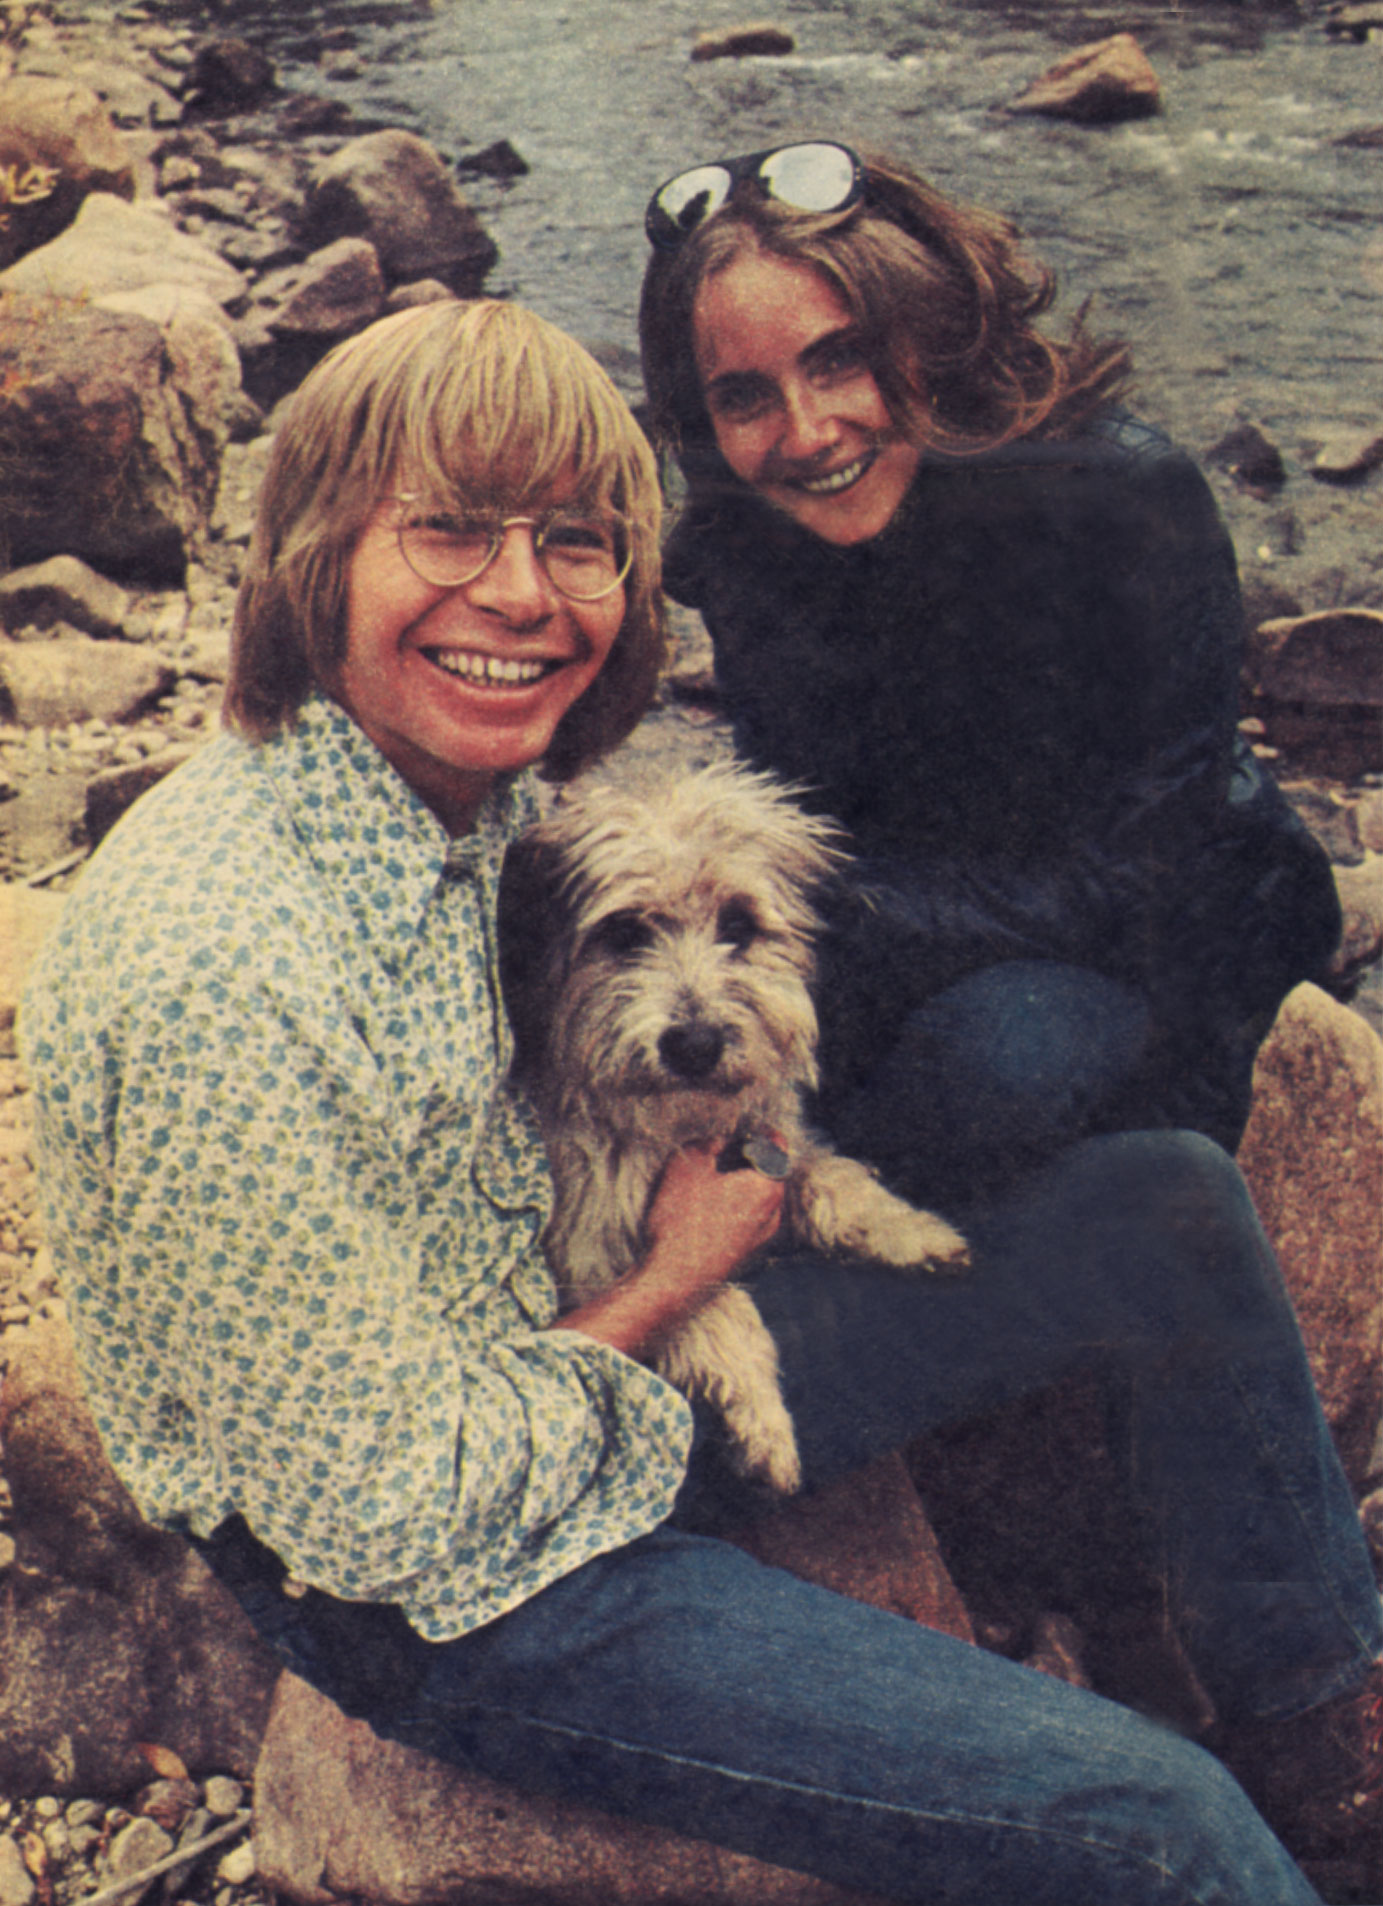 John Denver with his wife Ann Martell and their dog on October 13, 1997. | Source: Getty Images